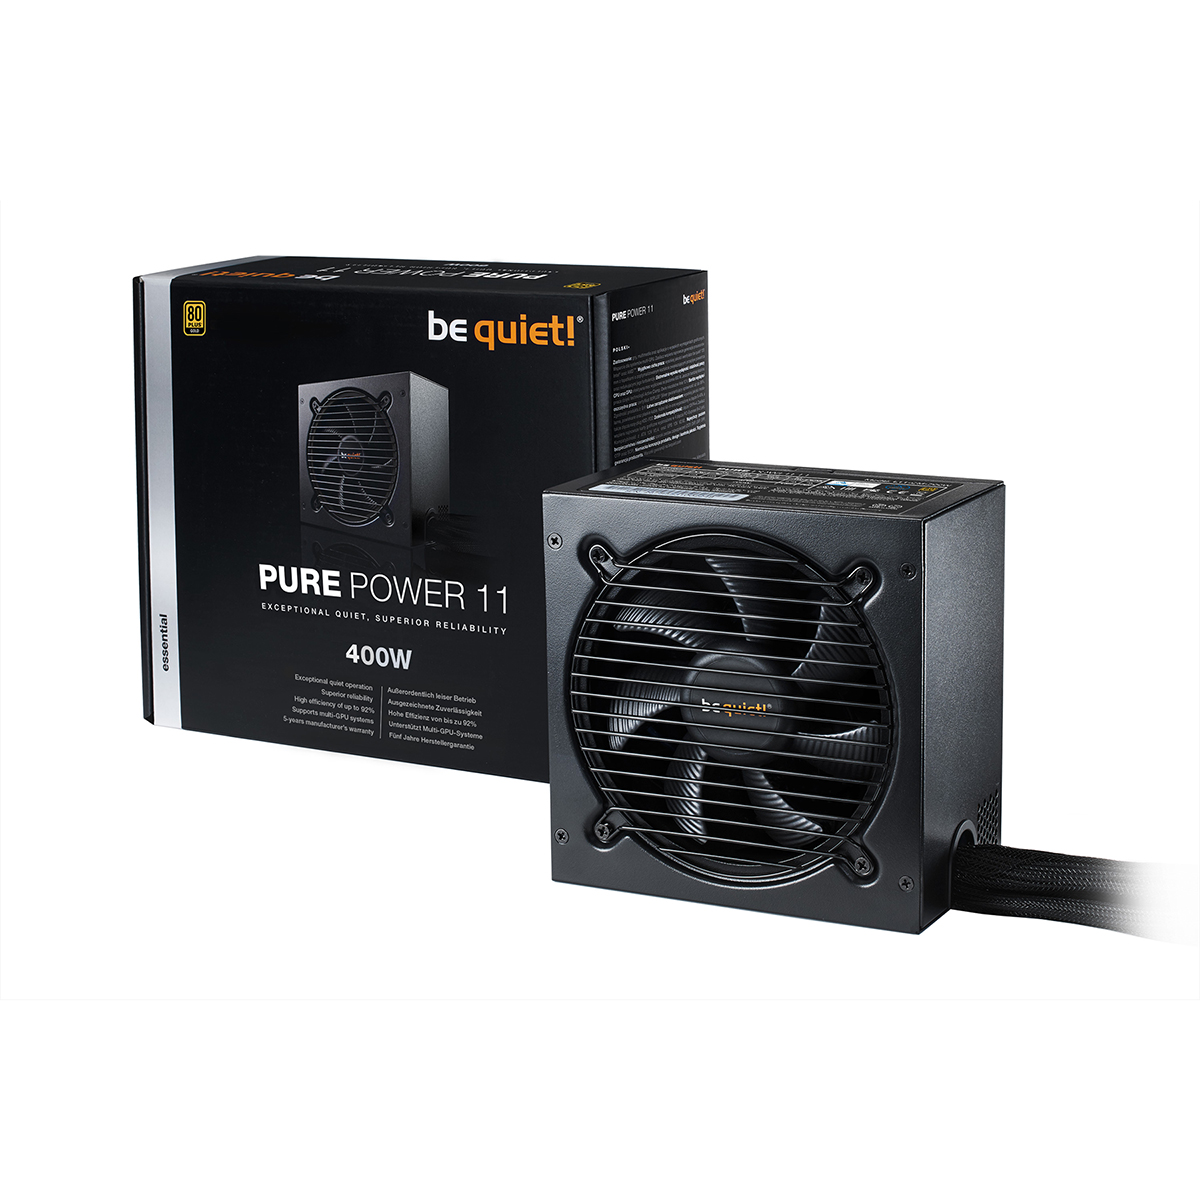 be quiet! - be quiet Pure Power 11 400W 80 Plus Gold Power Supply